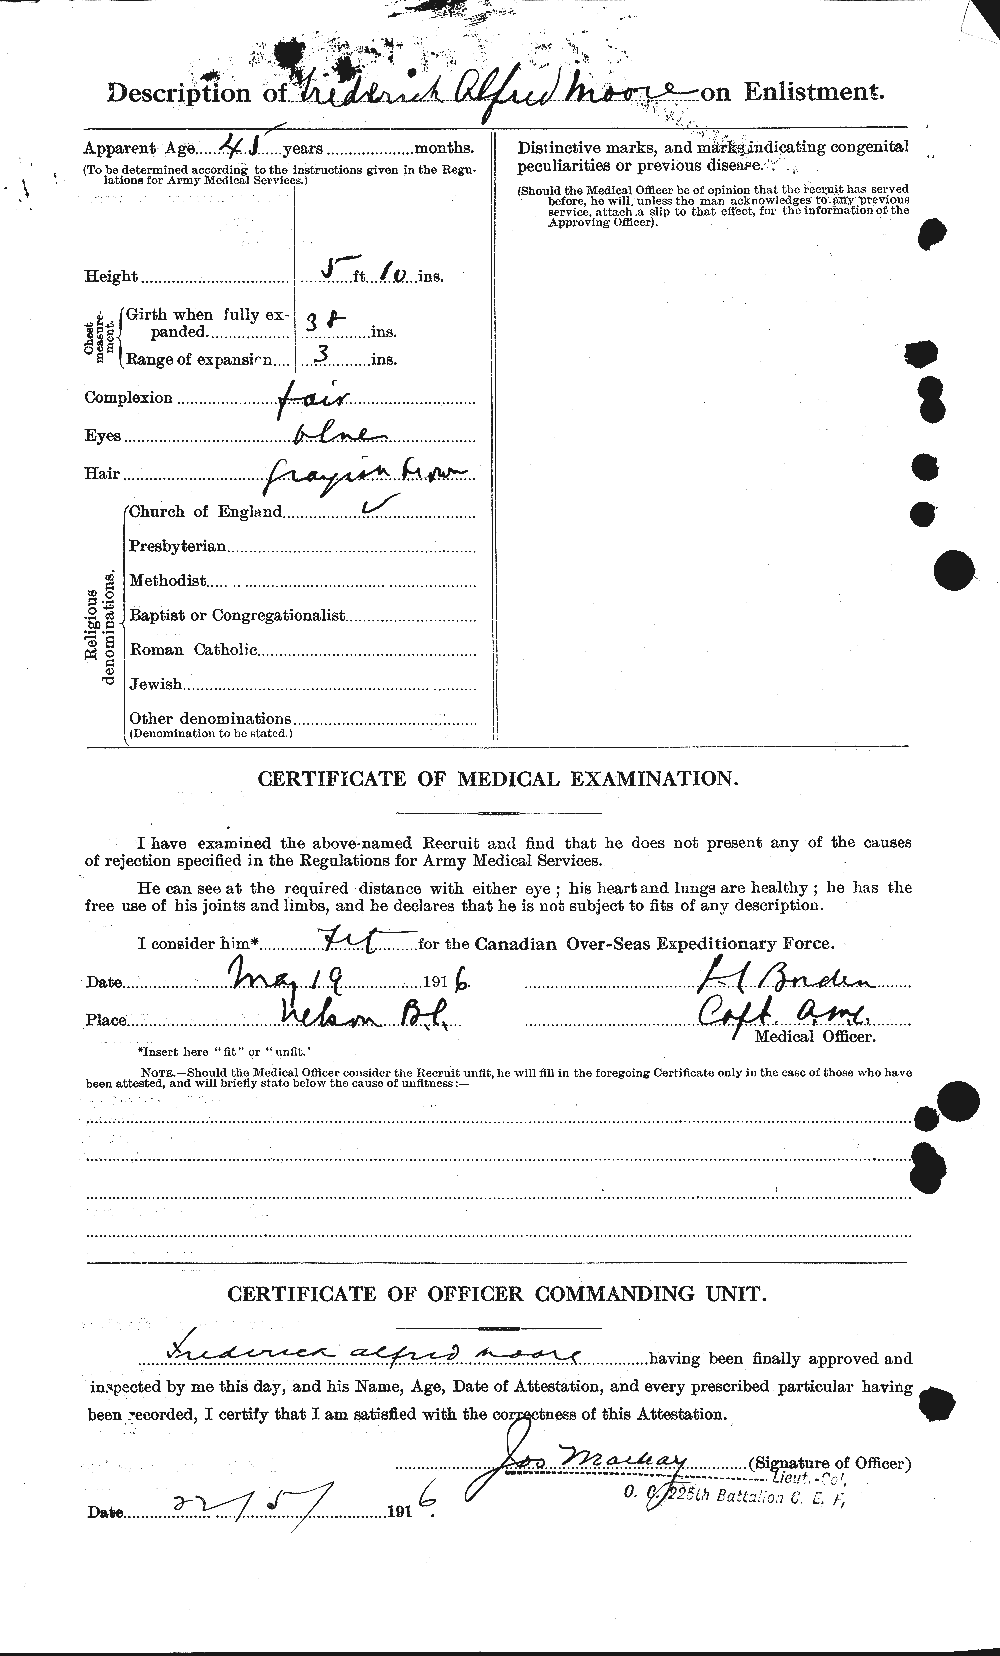 Personnel Records of the First World War - CEF 506739b